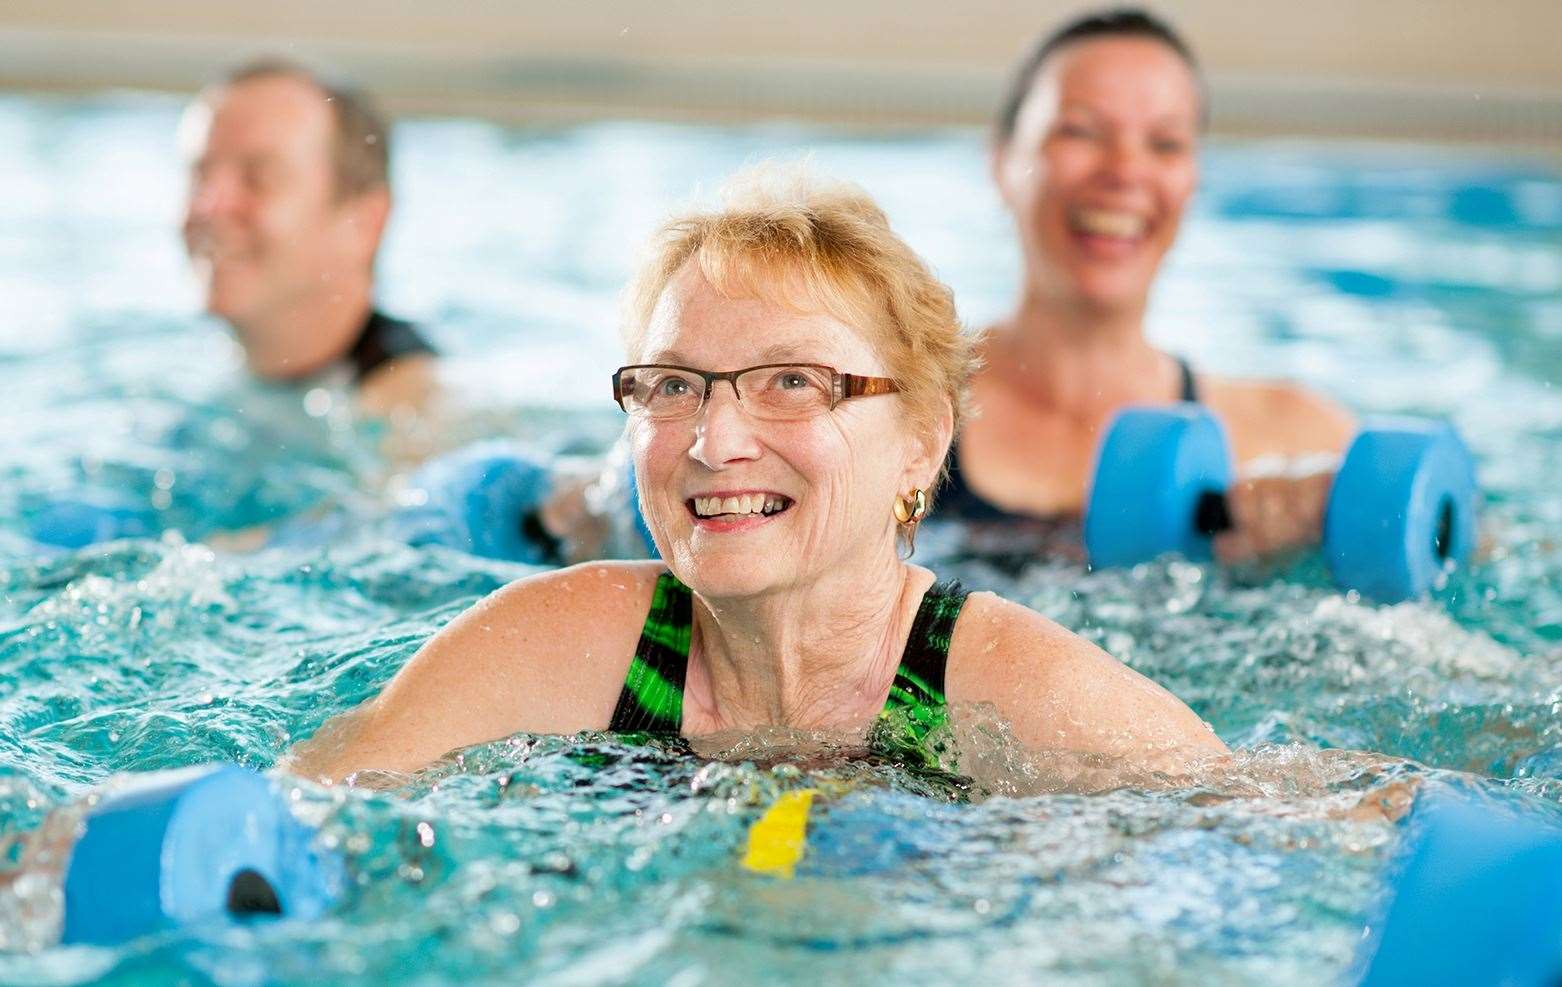 The leisure centres offer group exercise classes, swimming lessons and sports programmes. Picture: Fusion Lifestyle